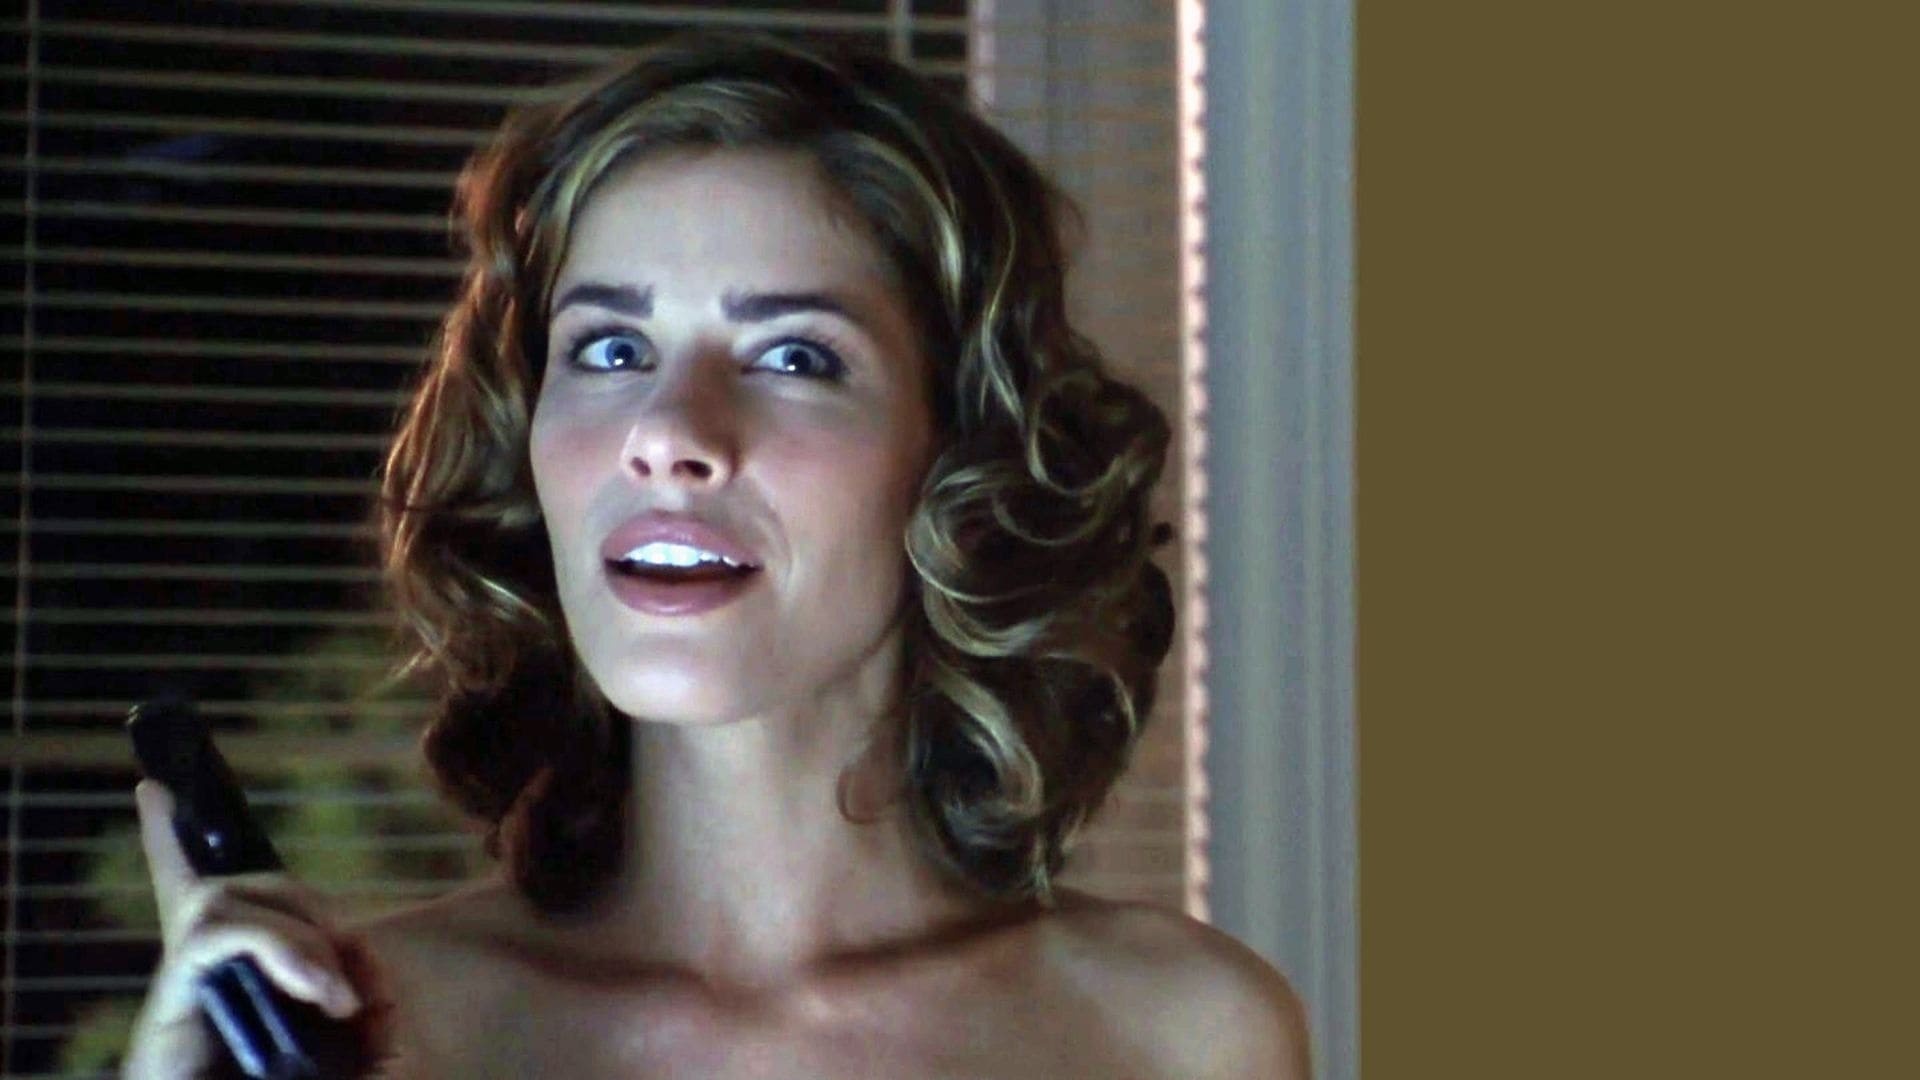 The Whole Ten Yards: Amanda Peet, An American actress, The portrayal of Jill St. Claire, A 2000 movie. 1920x1080 Full HD Wallpaper.